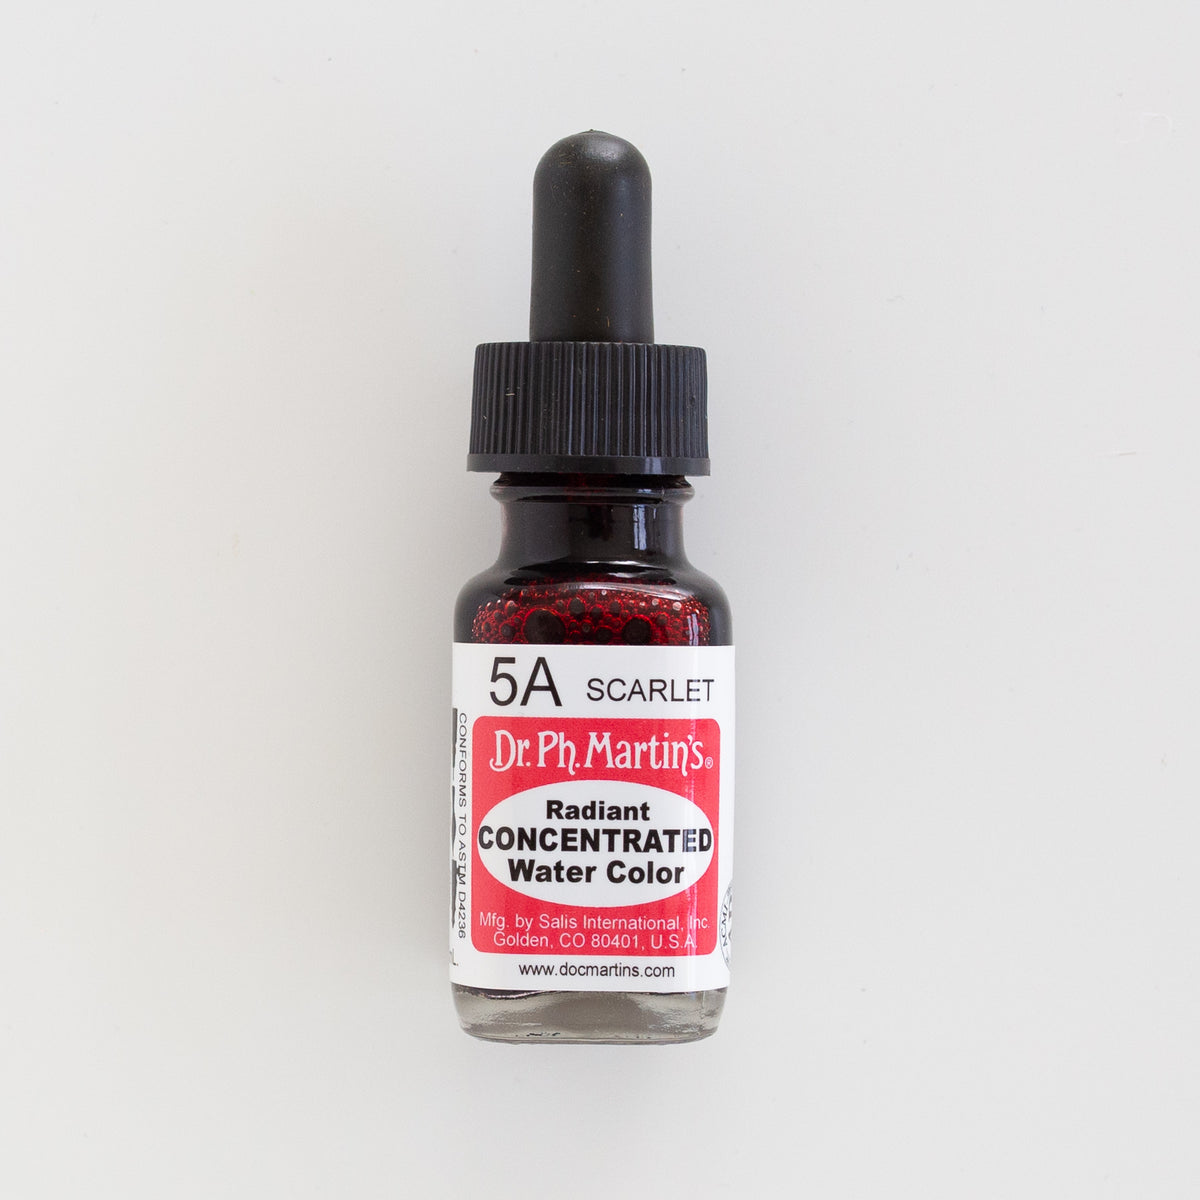 Dr. Ph. Martin’s Radiant Concentrated 5A Scarlet